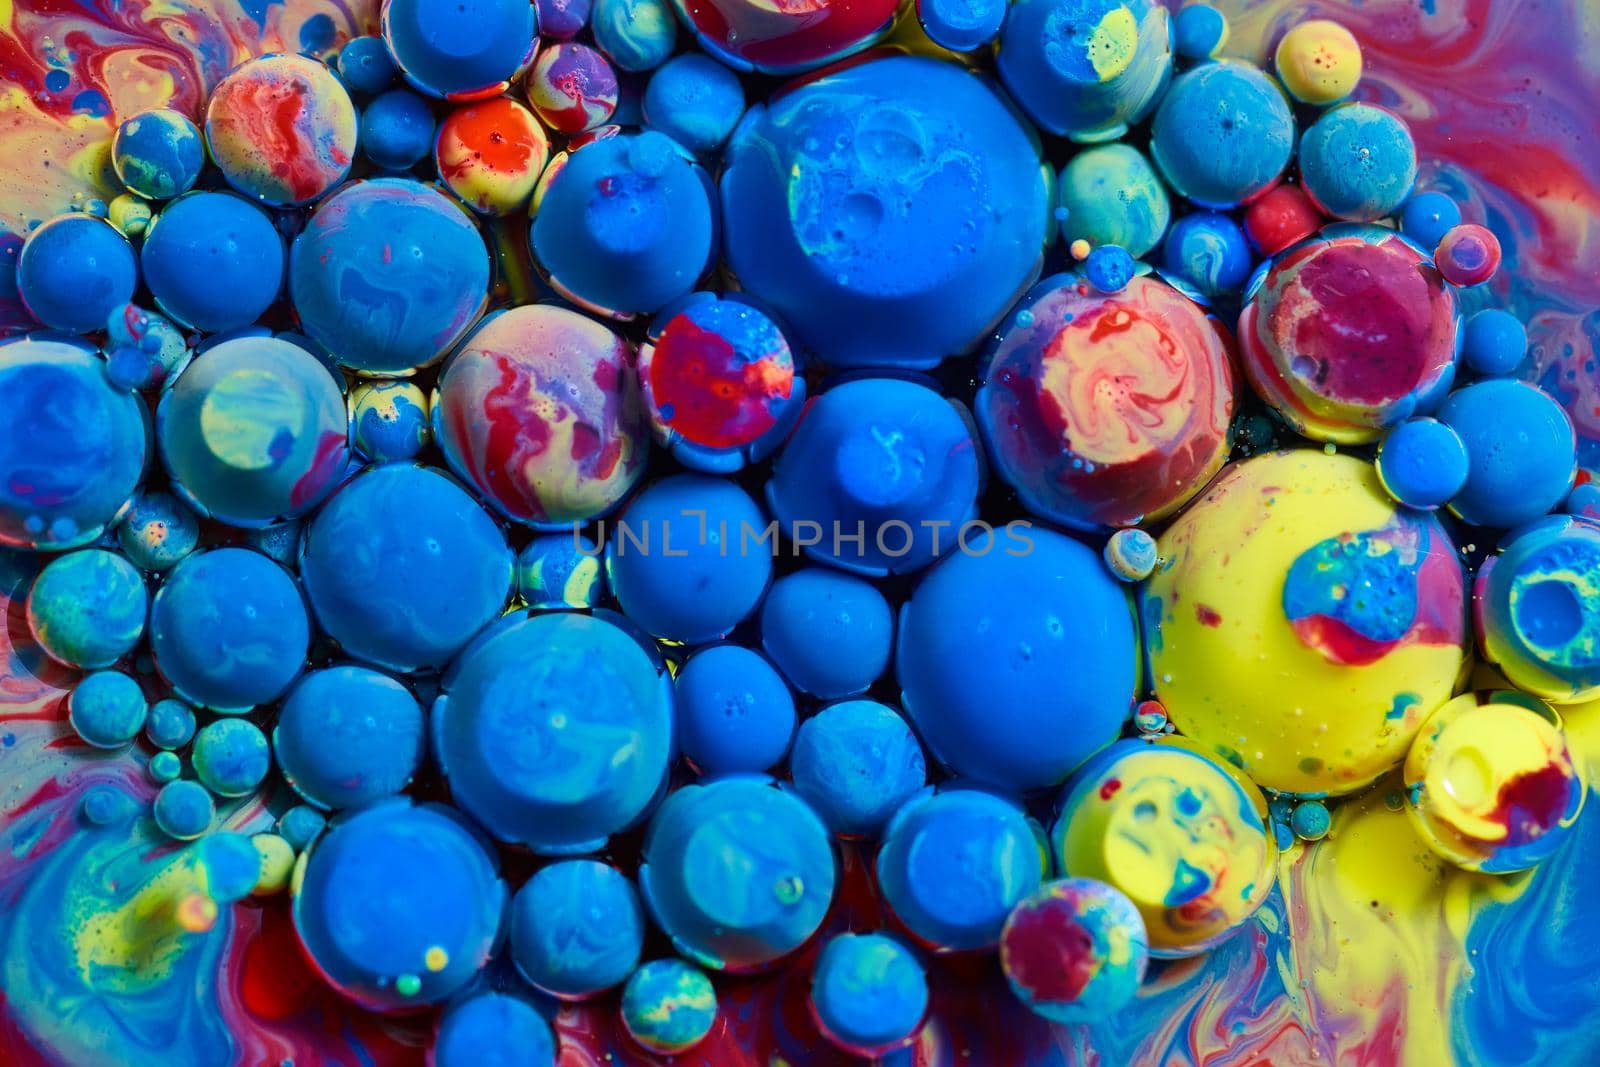 Image of Texture of orbs of acrylic paint floating on surface in cluster